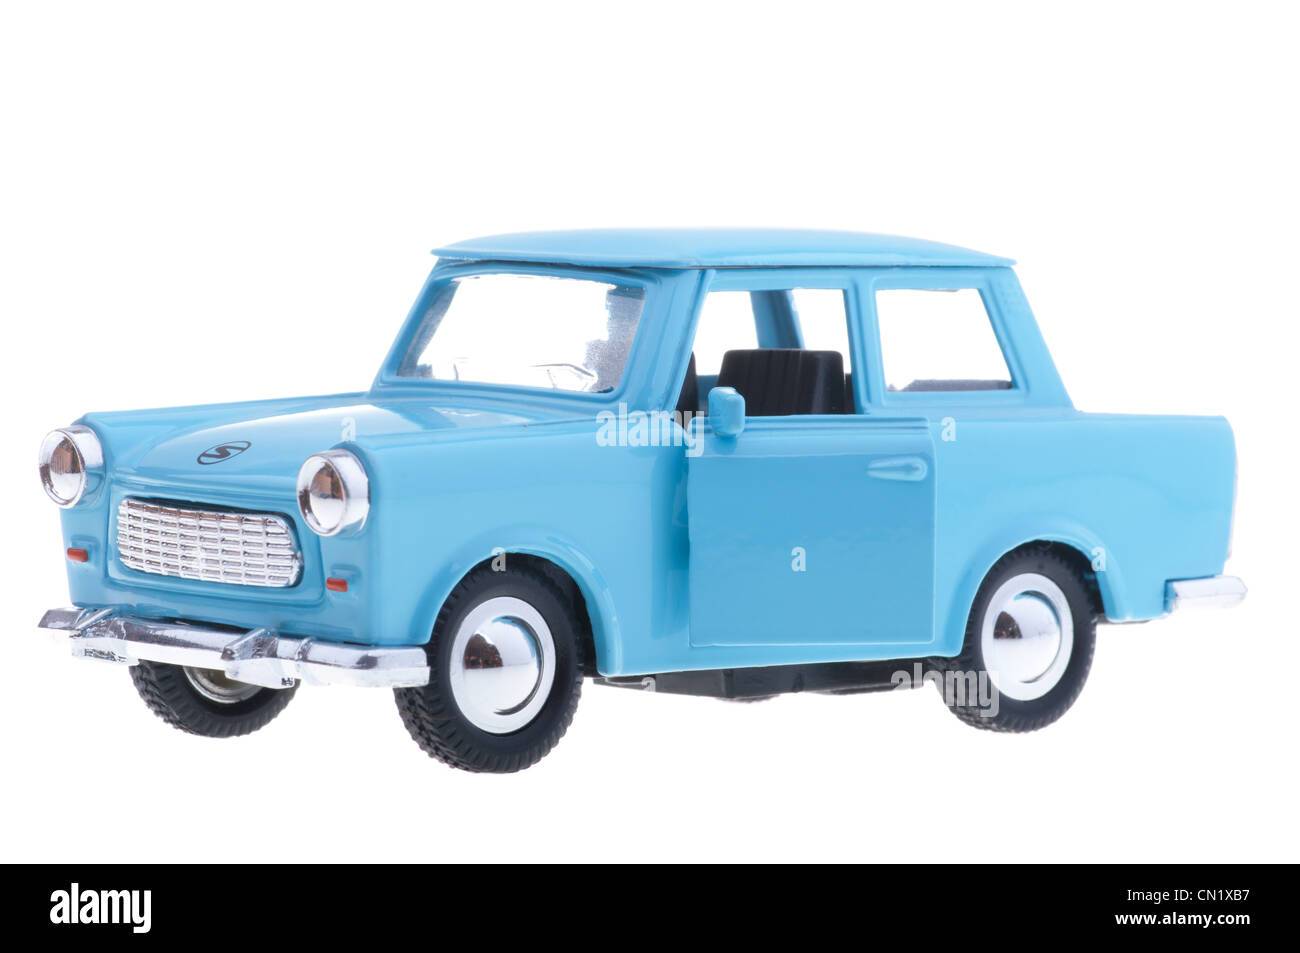 Old car trabant with open doors on white background. Stock Photo